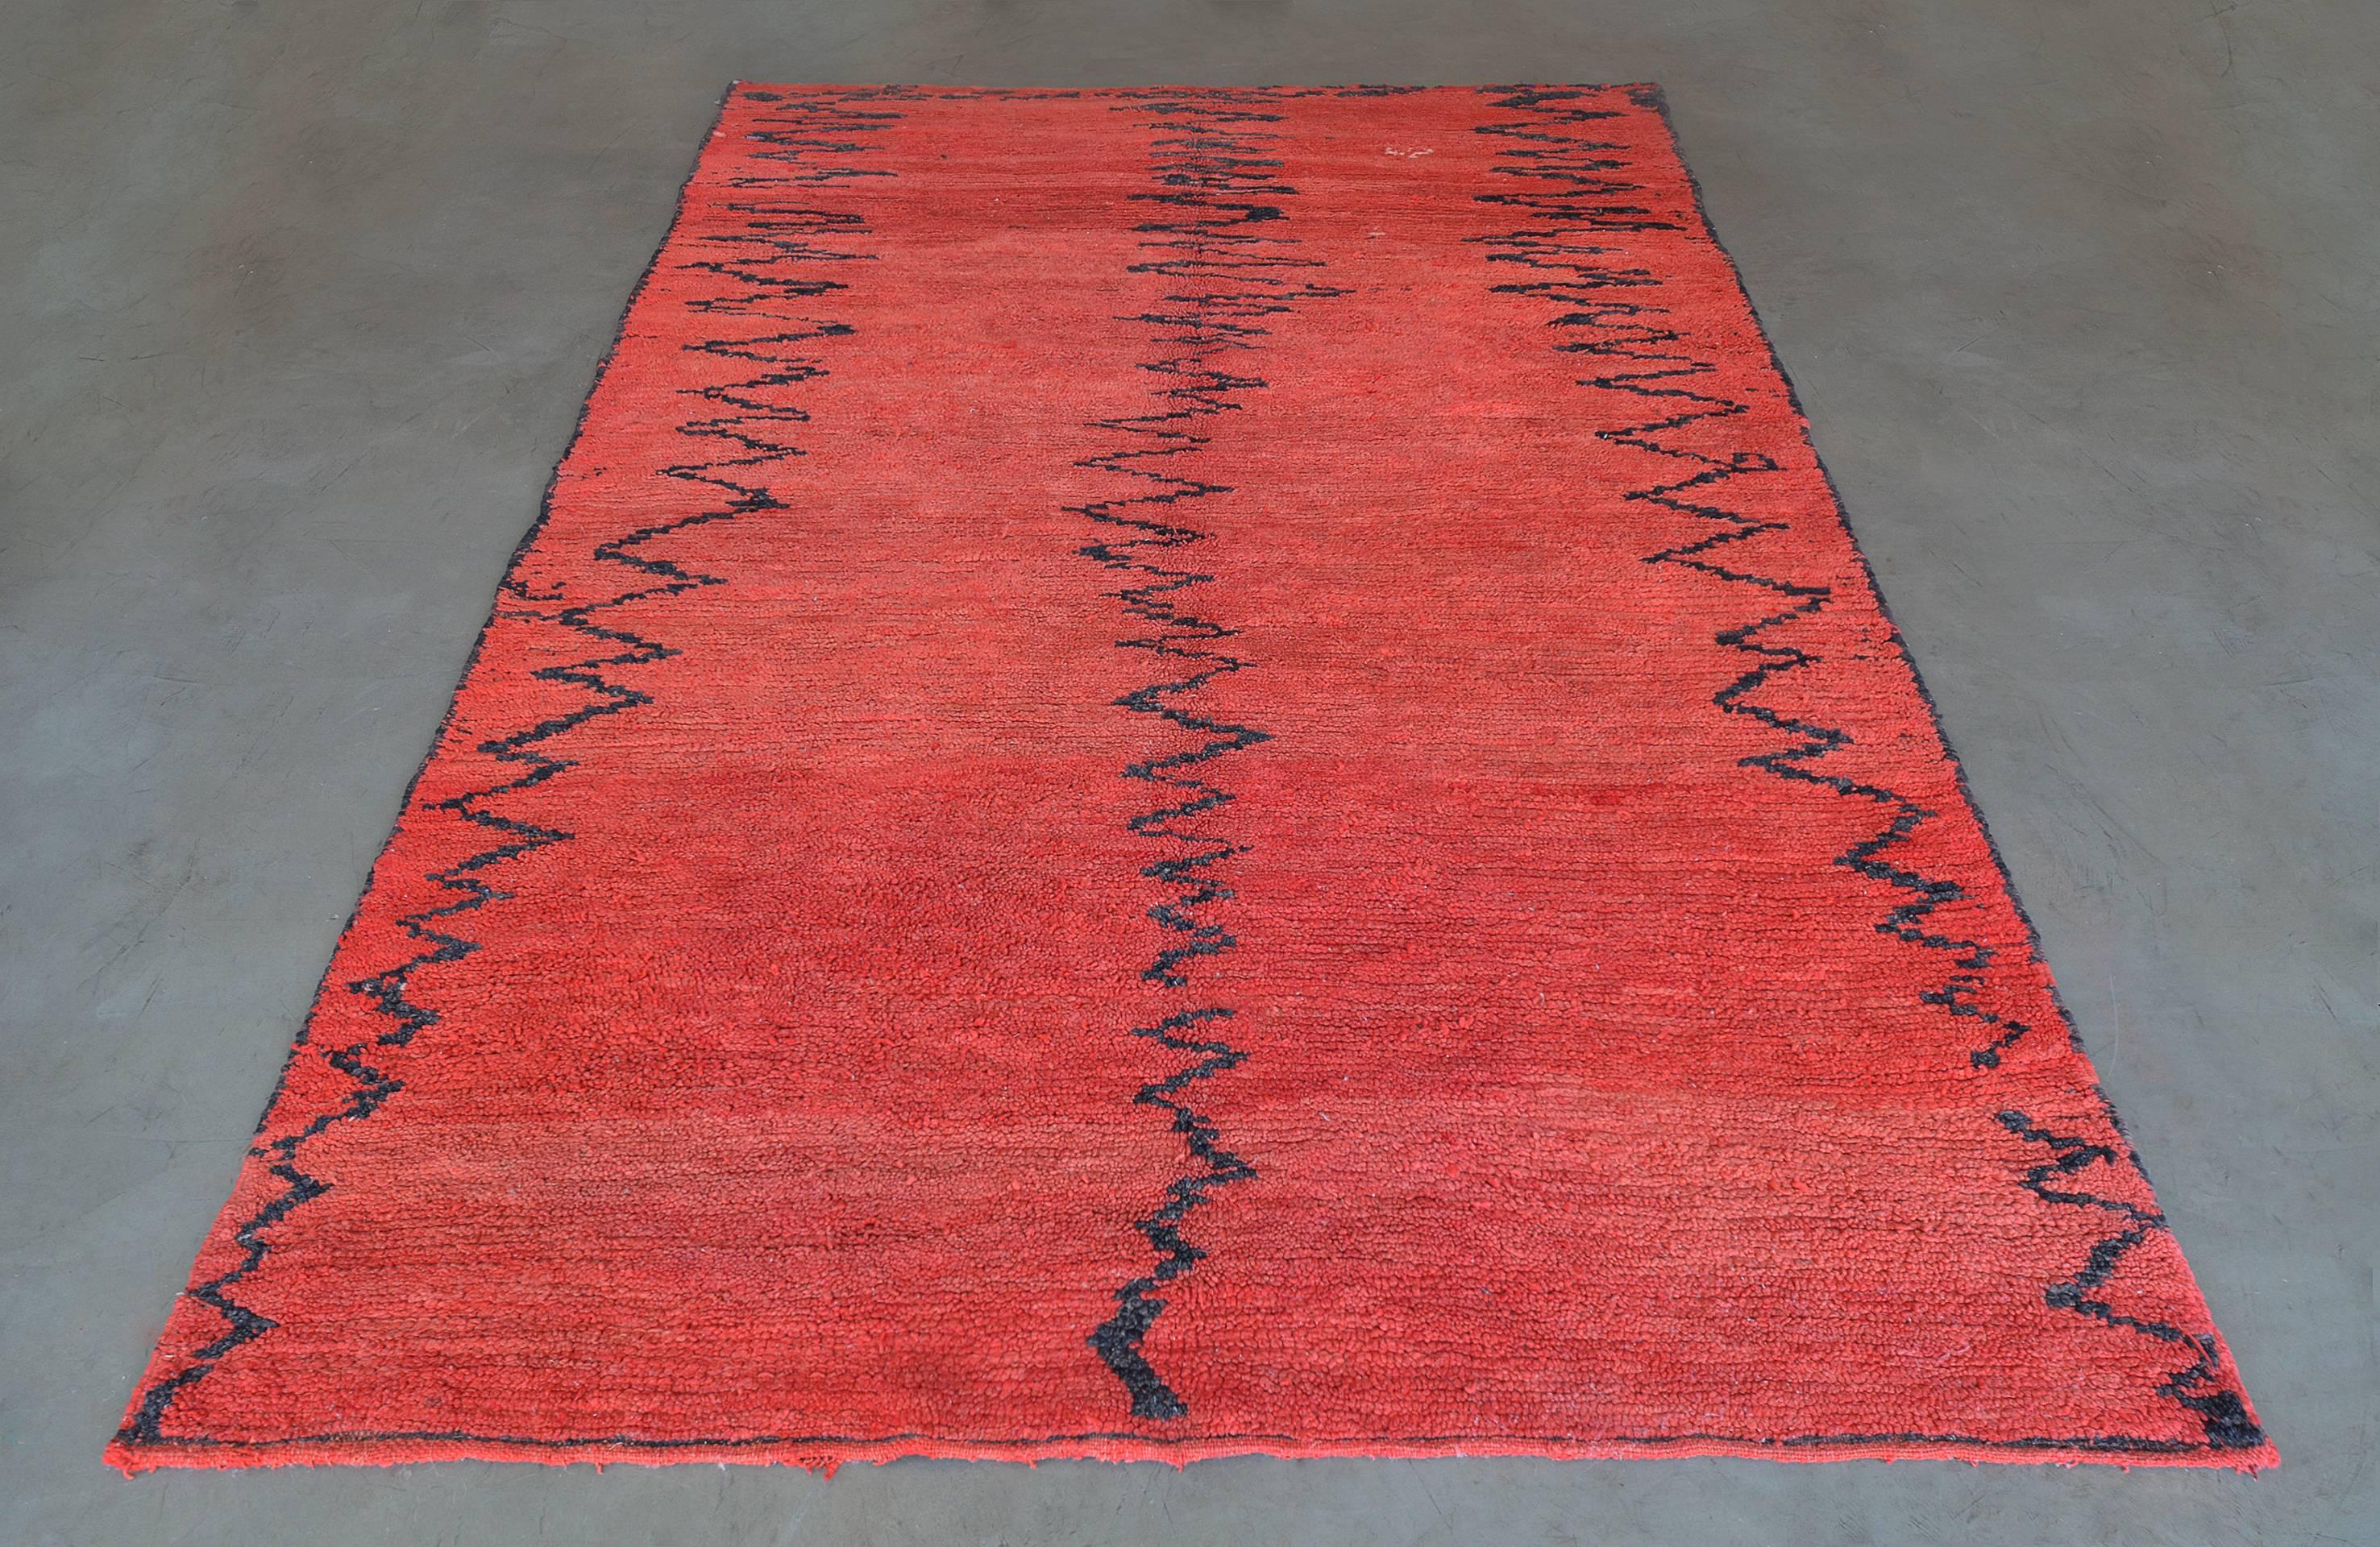 The coral-red field with three columns of zig-zag ribbon motifs.